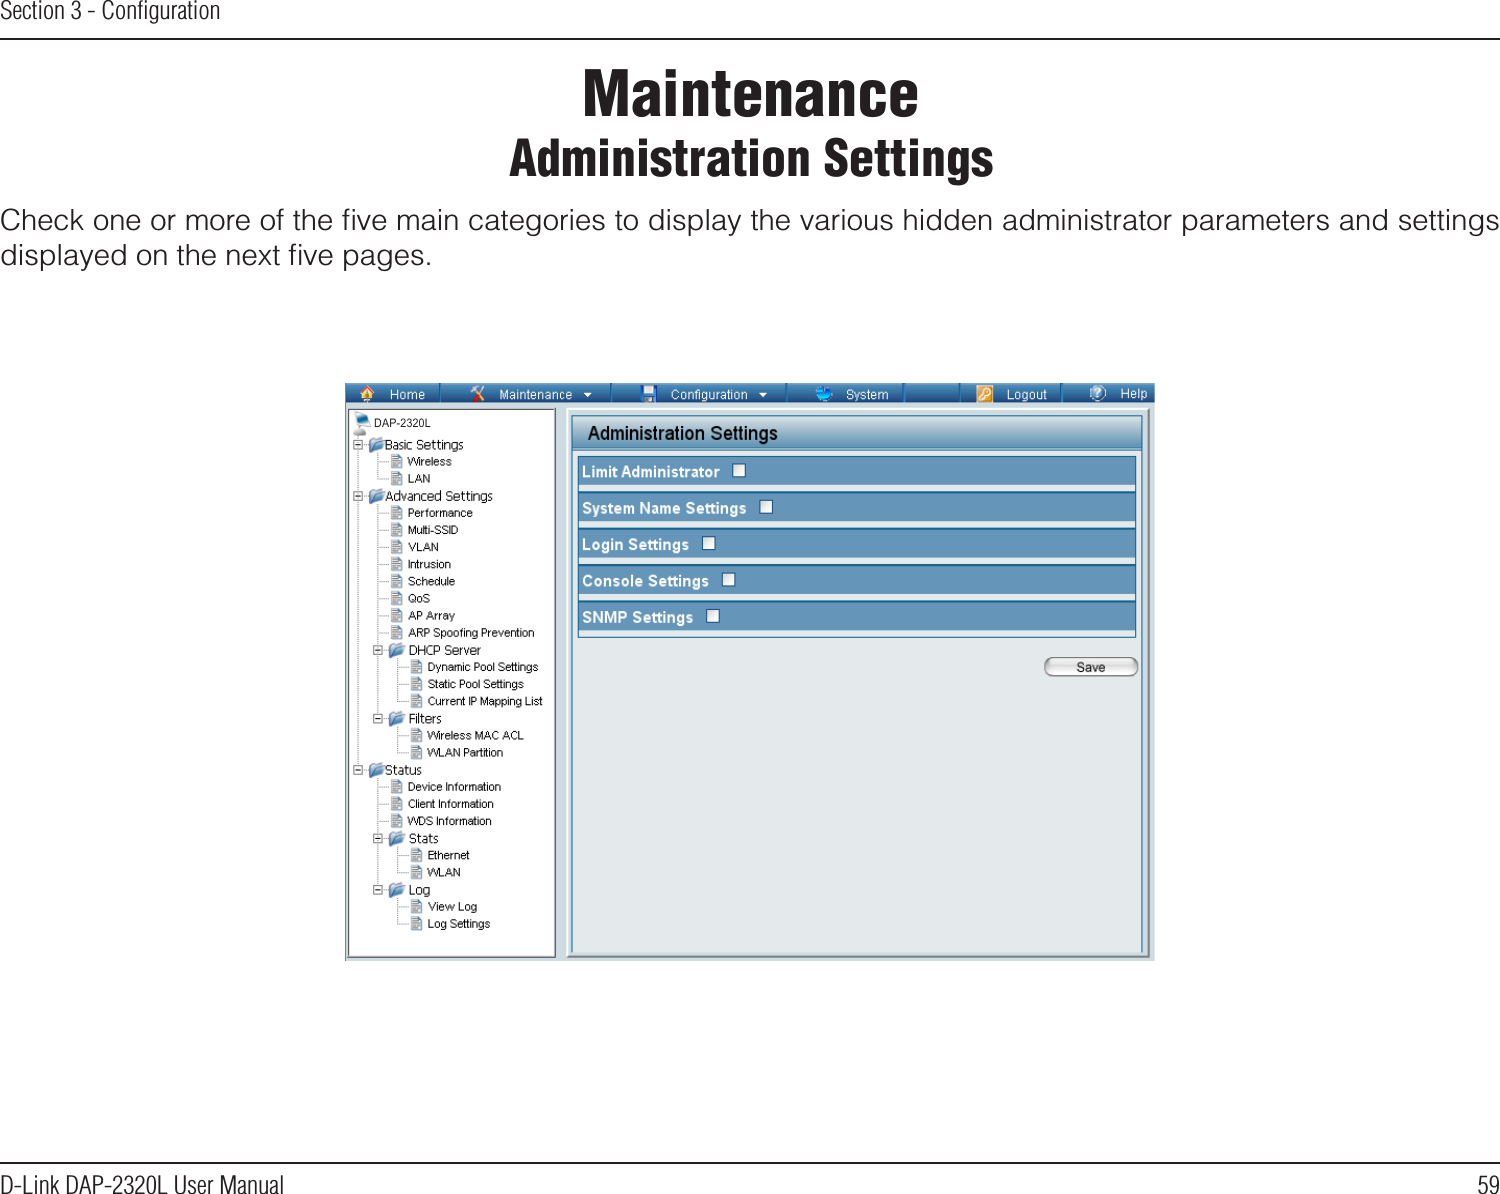 59D-Link DAP-2320L User ManualSection 3 - ConﬁgurationCheck one or more of the ﬁve main categories to display the various hidden administrator parameters and settings displayed on the next ﬁve pages.  Maintenance Administration SettingsDAP-2320L